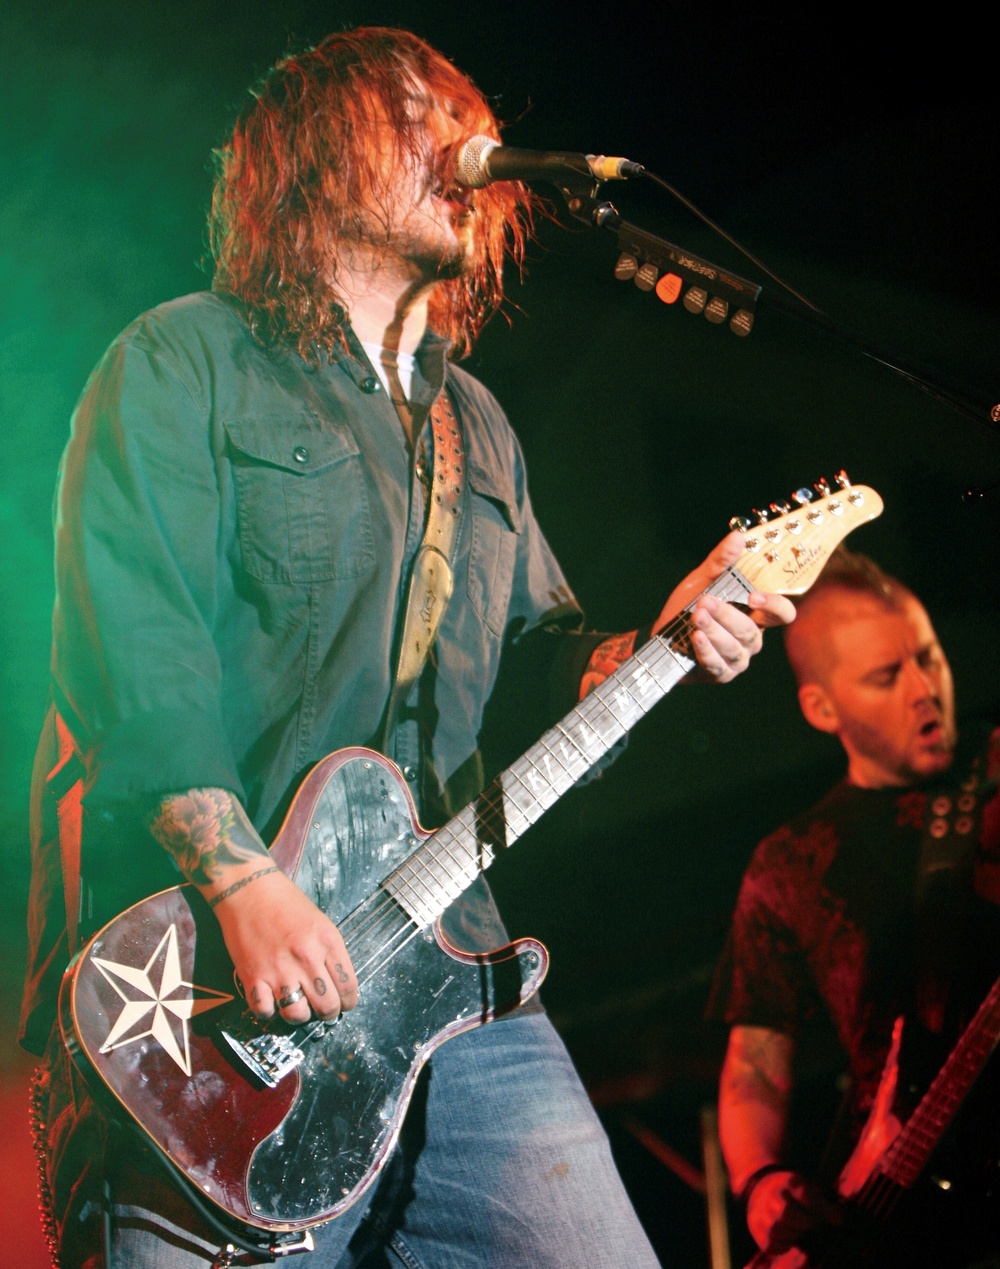 Seether performs for crowd on Okinawa, gains unexpected Corps insight